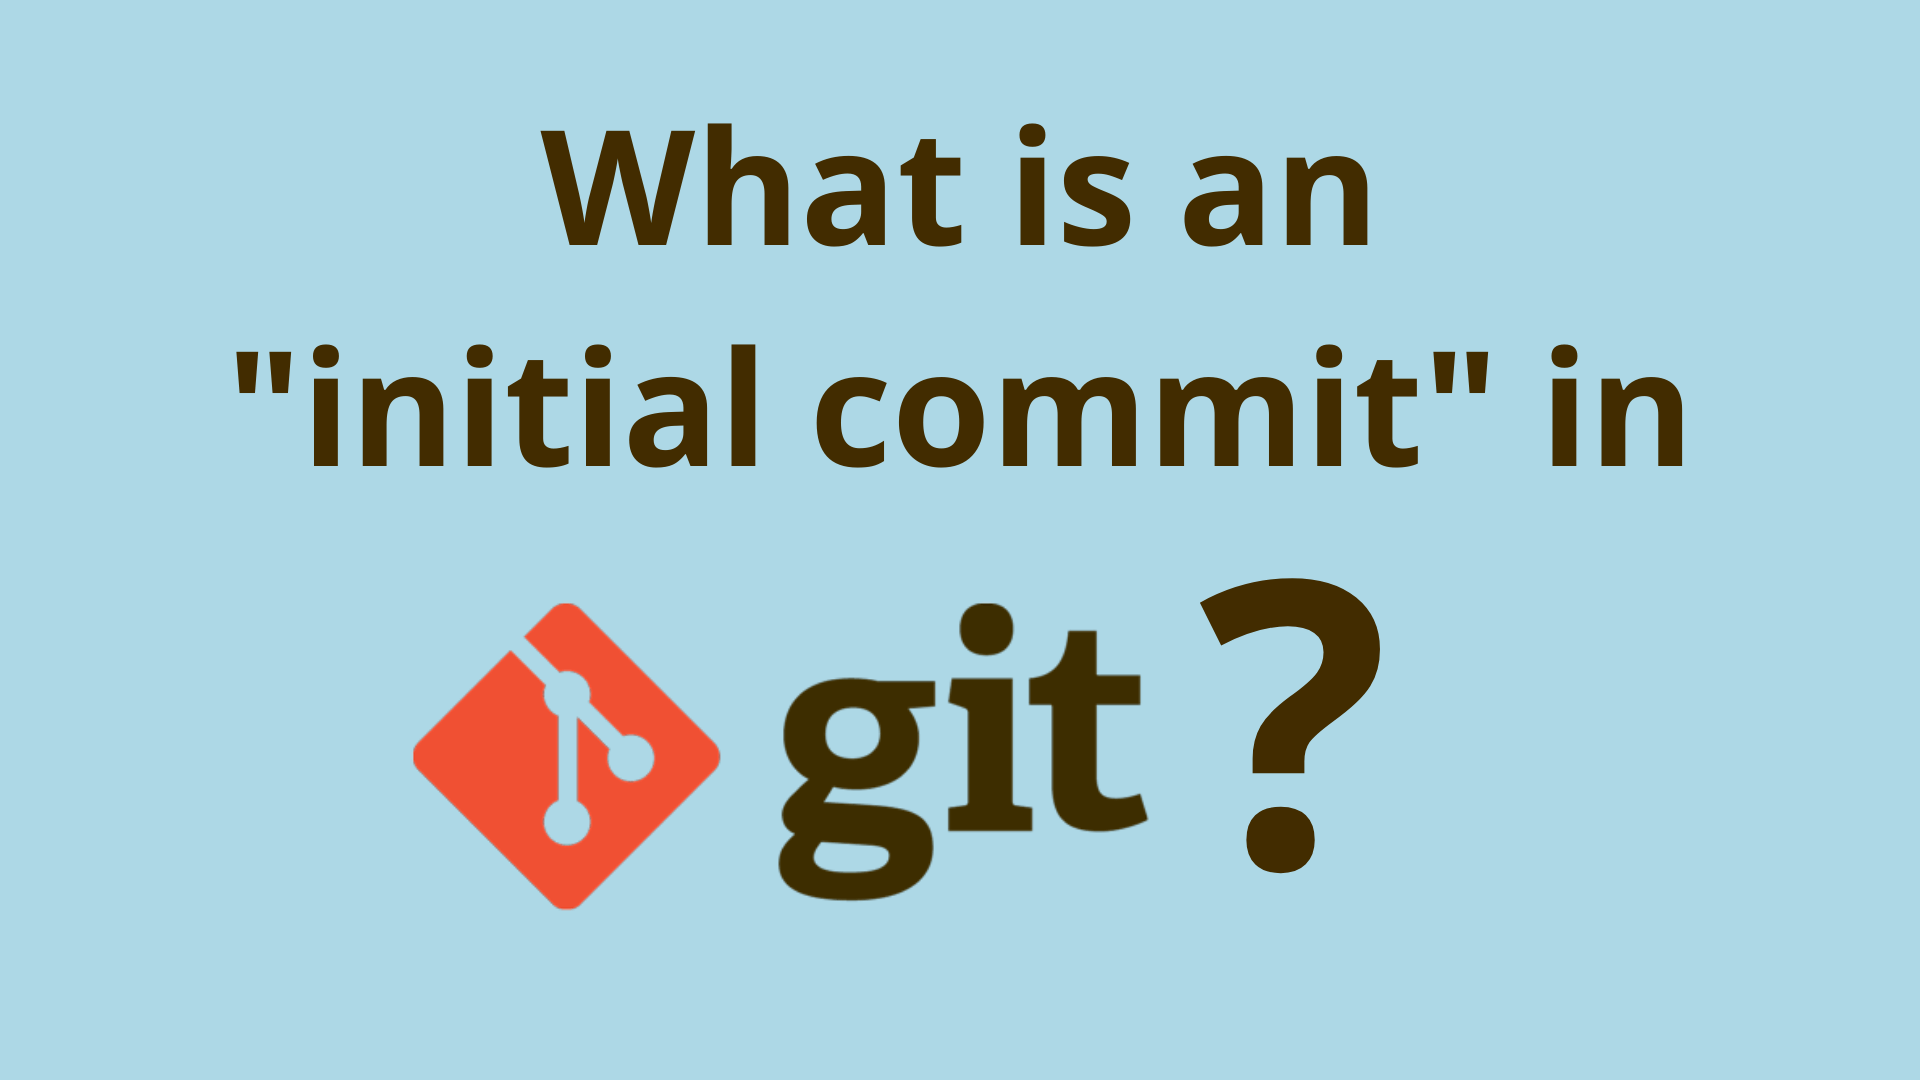 Image of What is an initial commit in Git?